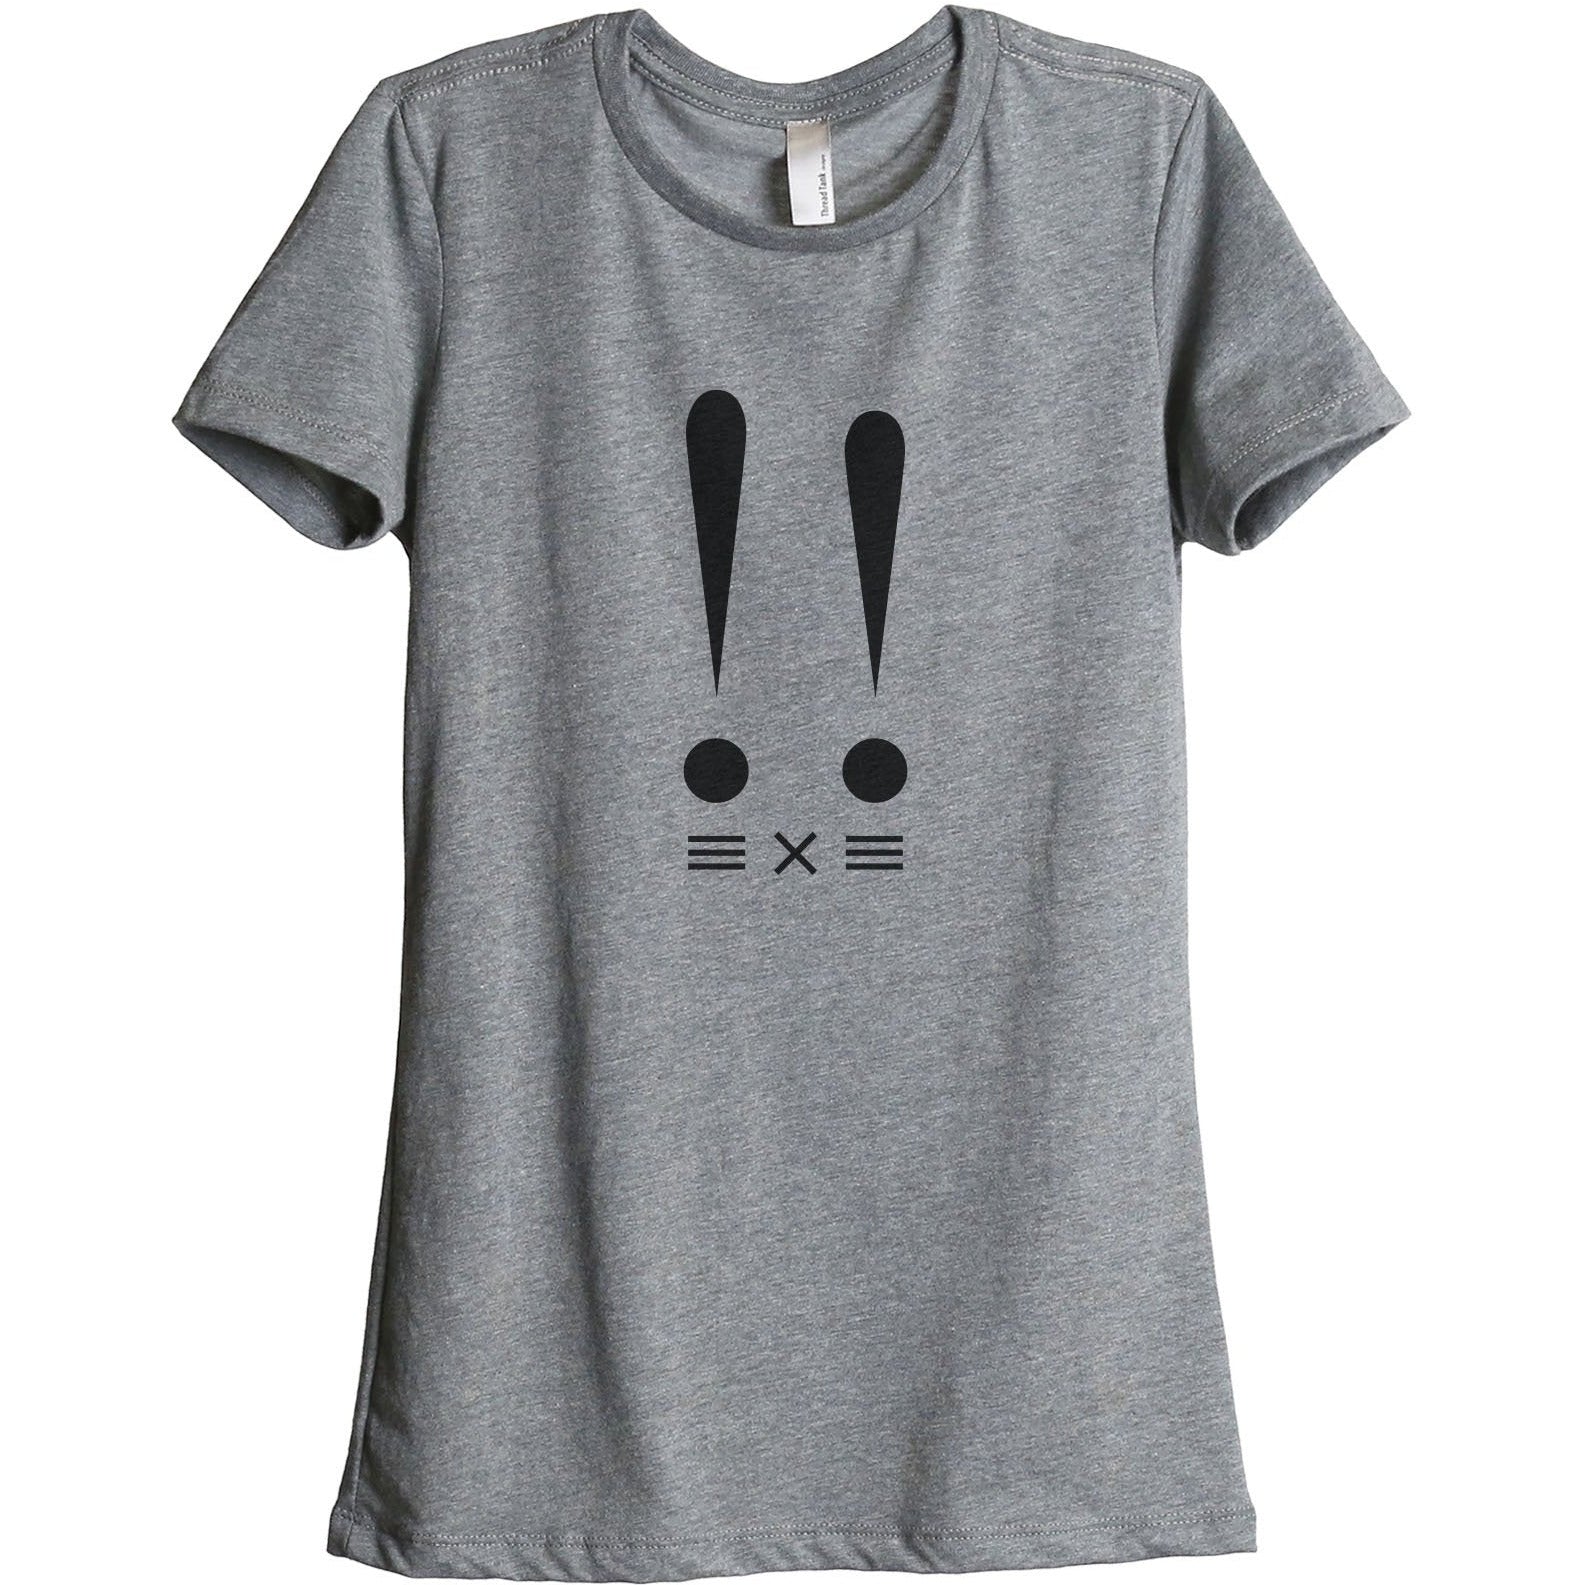 Bunny Mark - Thread Tank | Stories You Can Wear | T-Shirts, Tank Tops and Sweatshirts